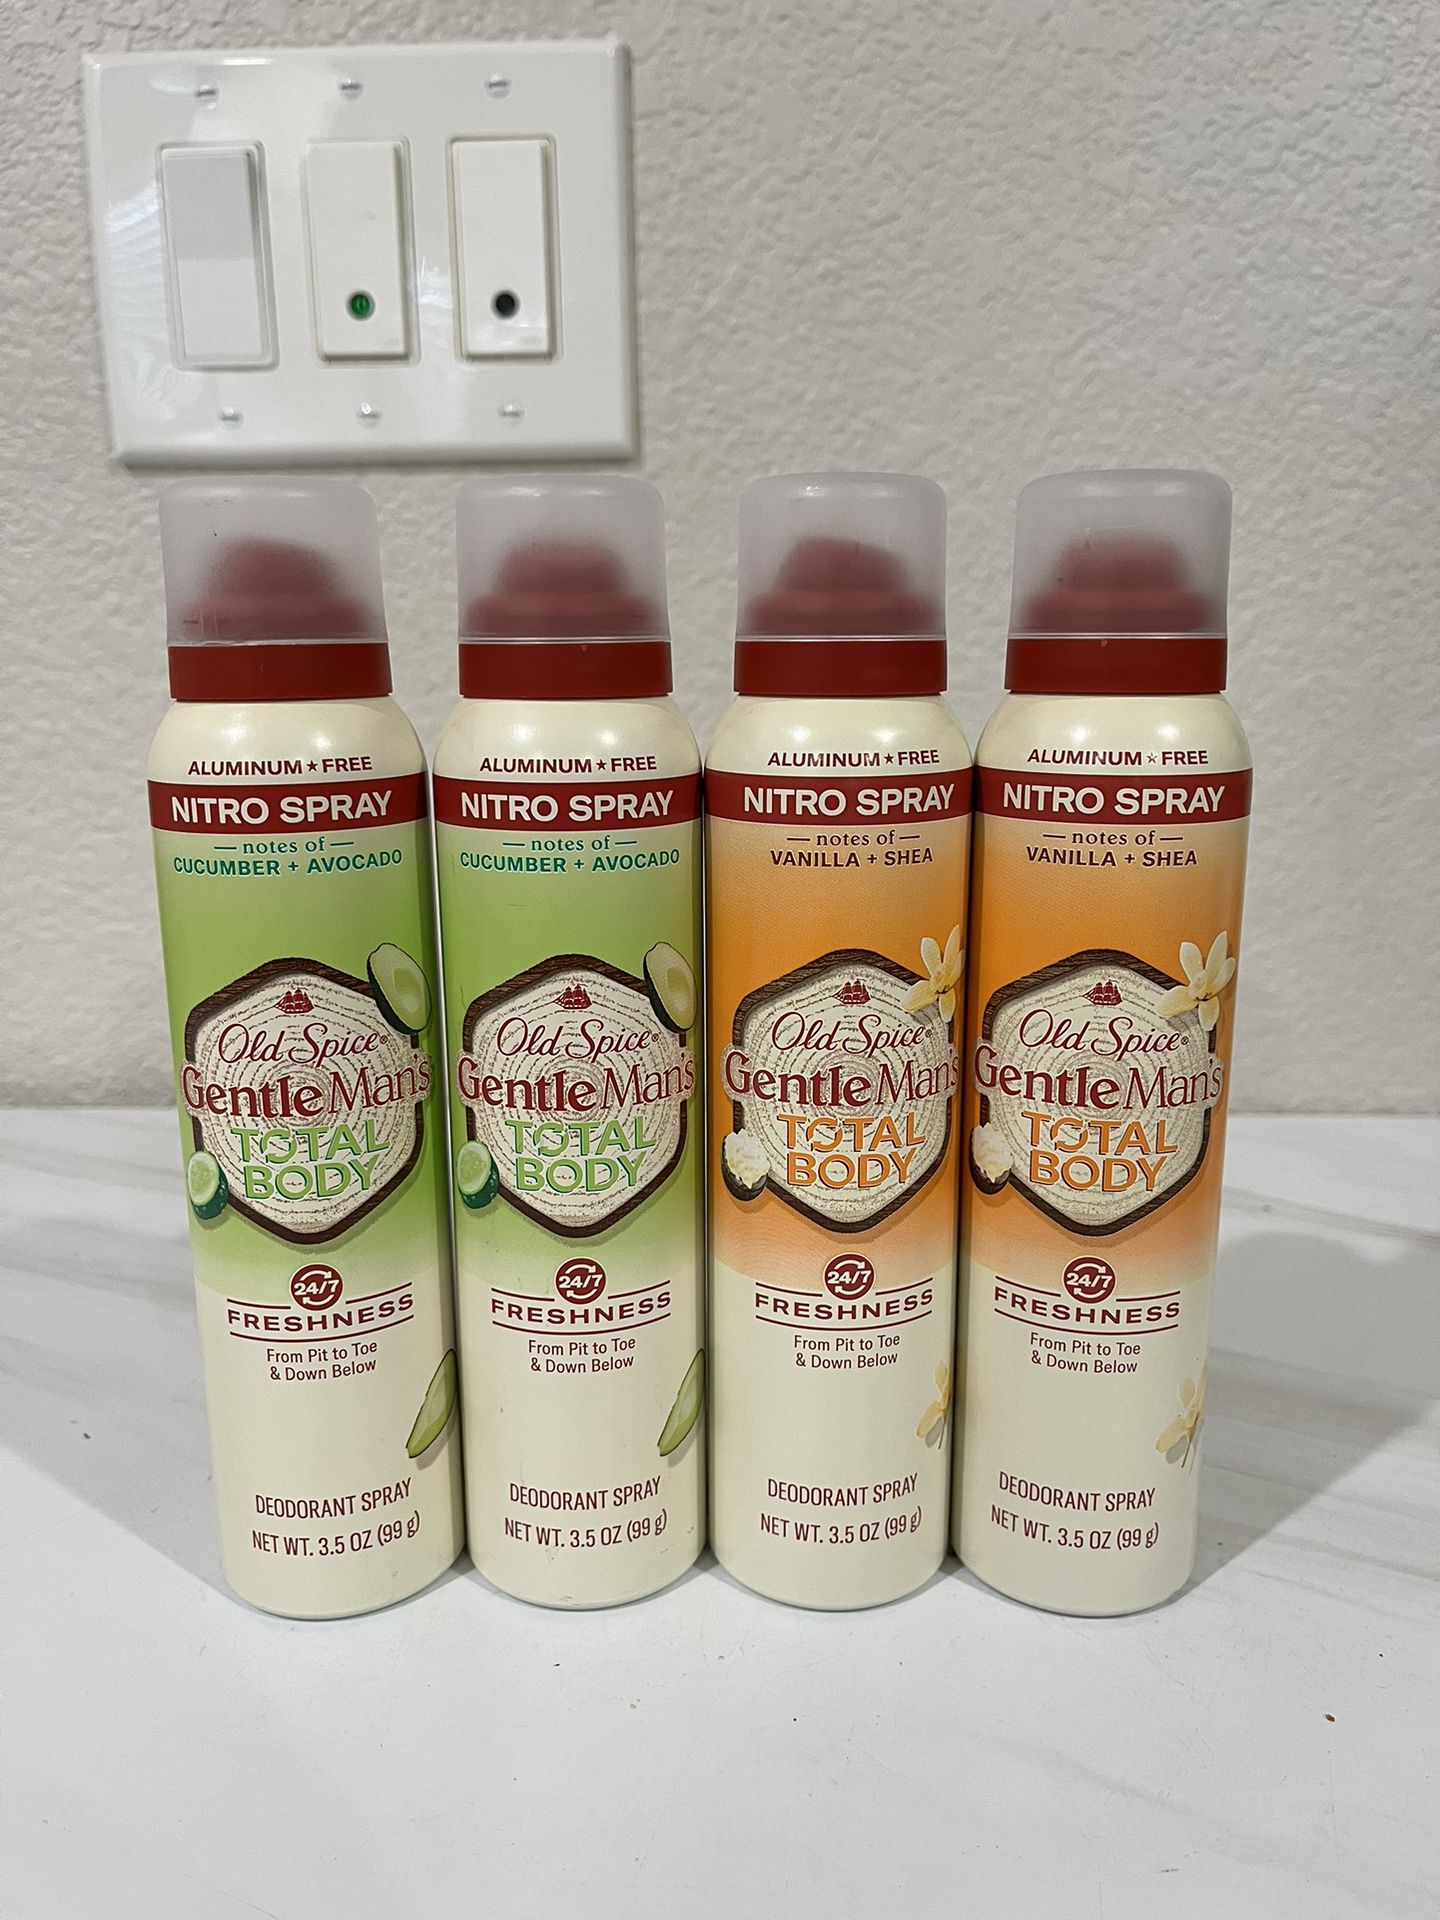 Brand new Old Spice Total Body Aluminum Free Spray (2 For $15)